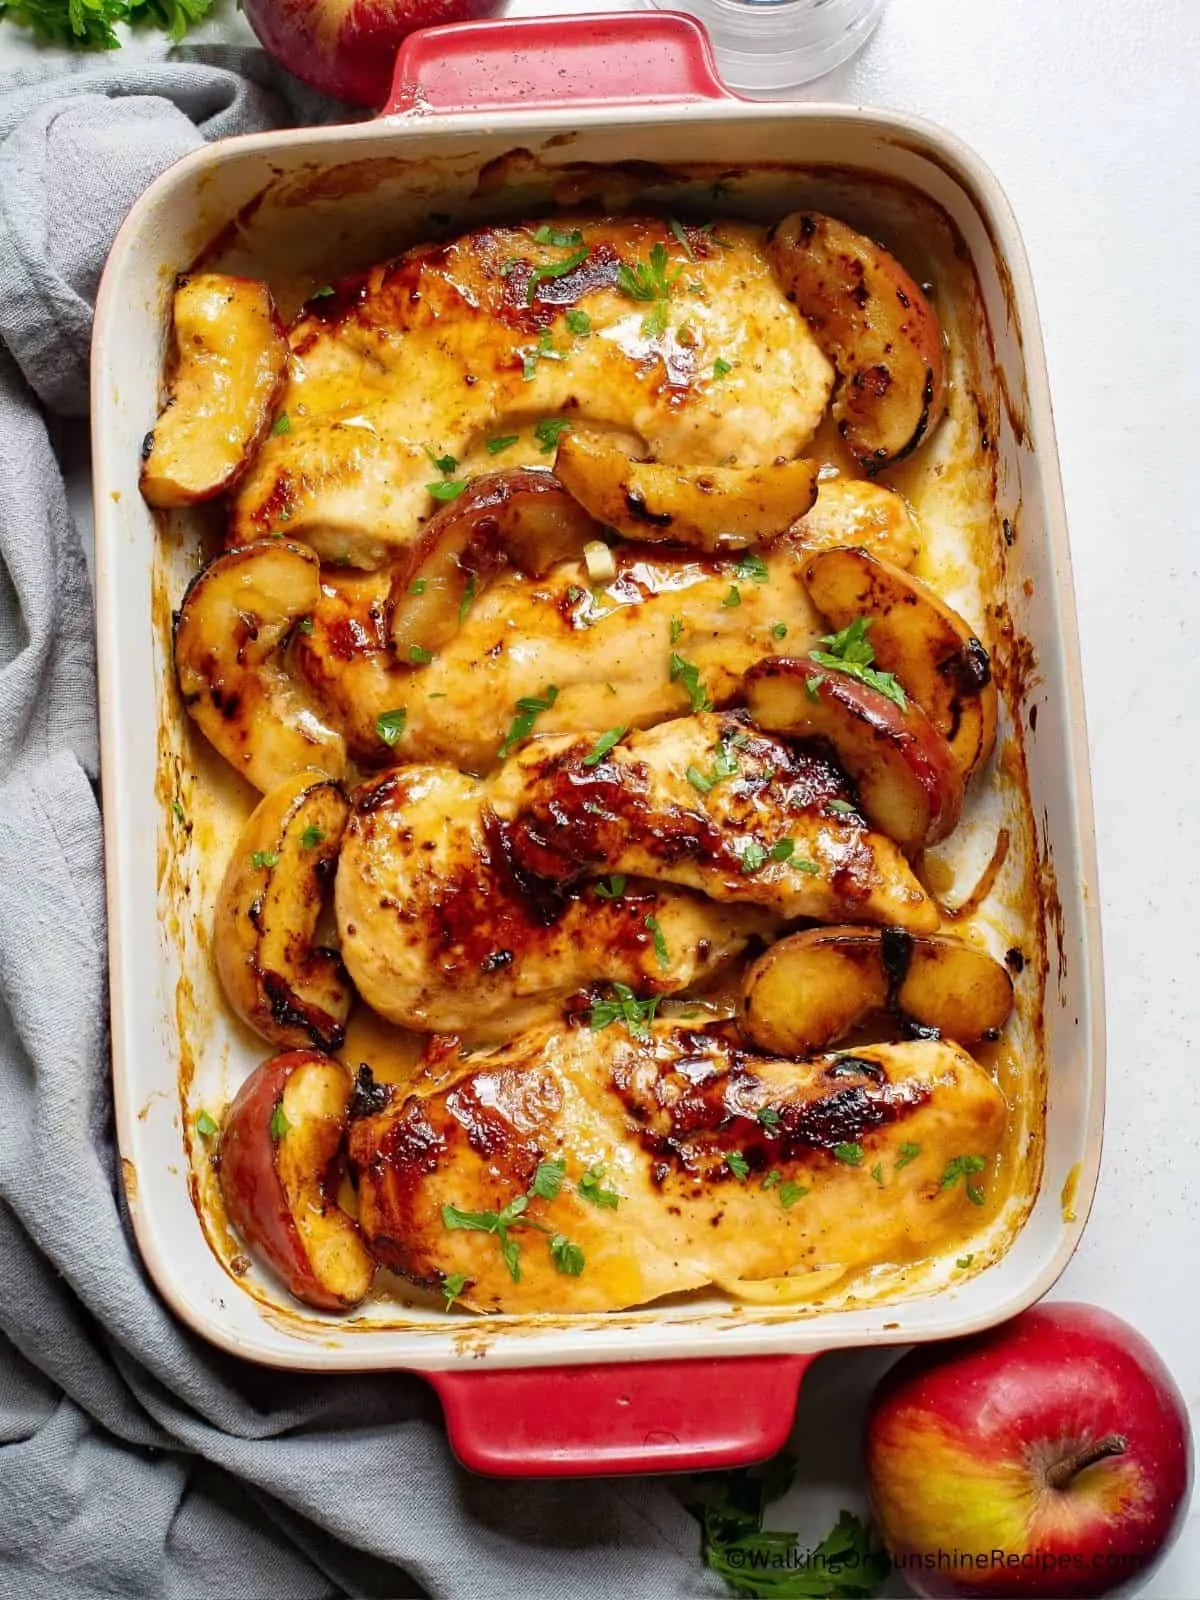 baked chicken breasts with apples in casserole dish with whole apple on side.